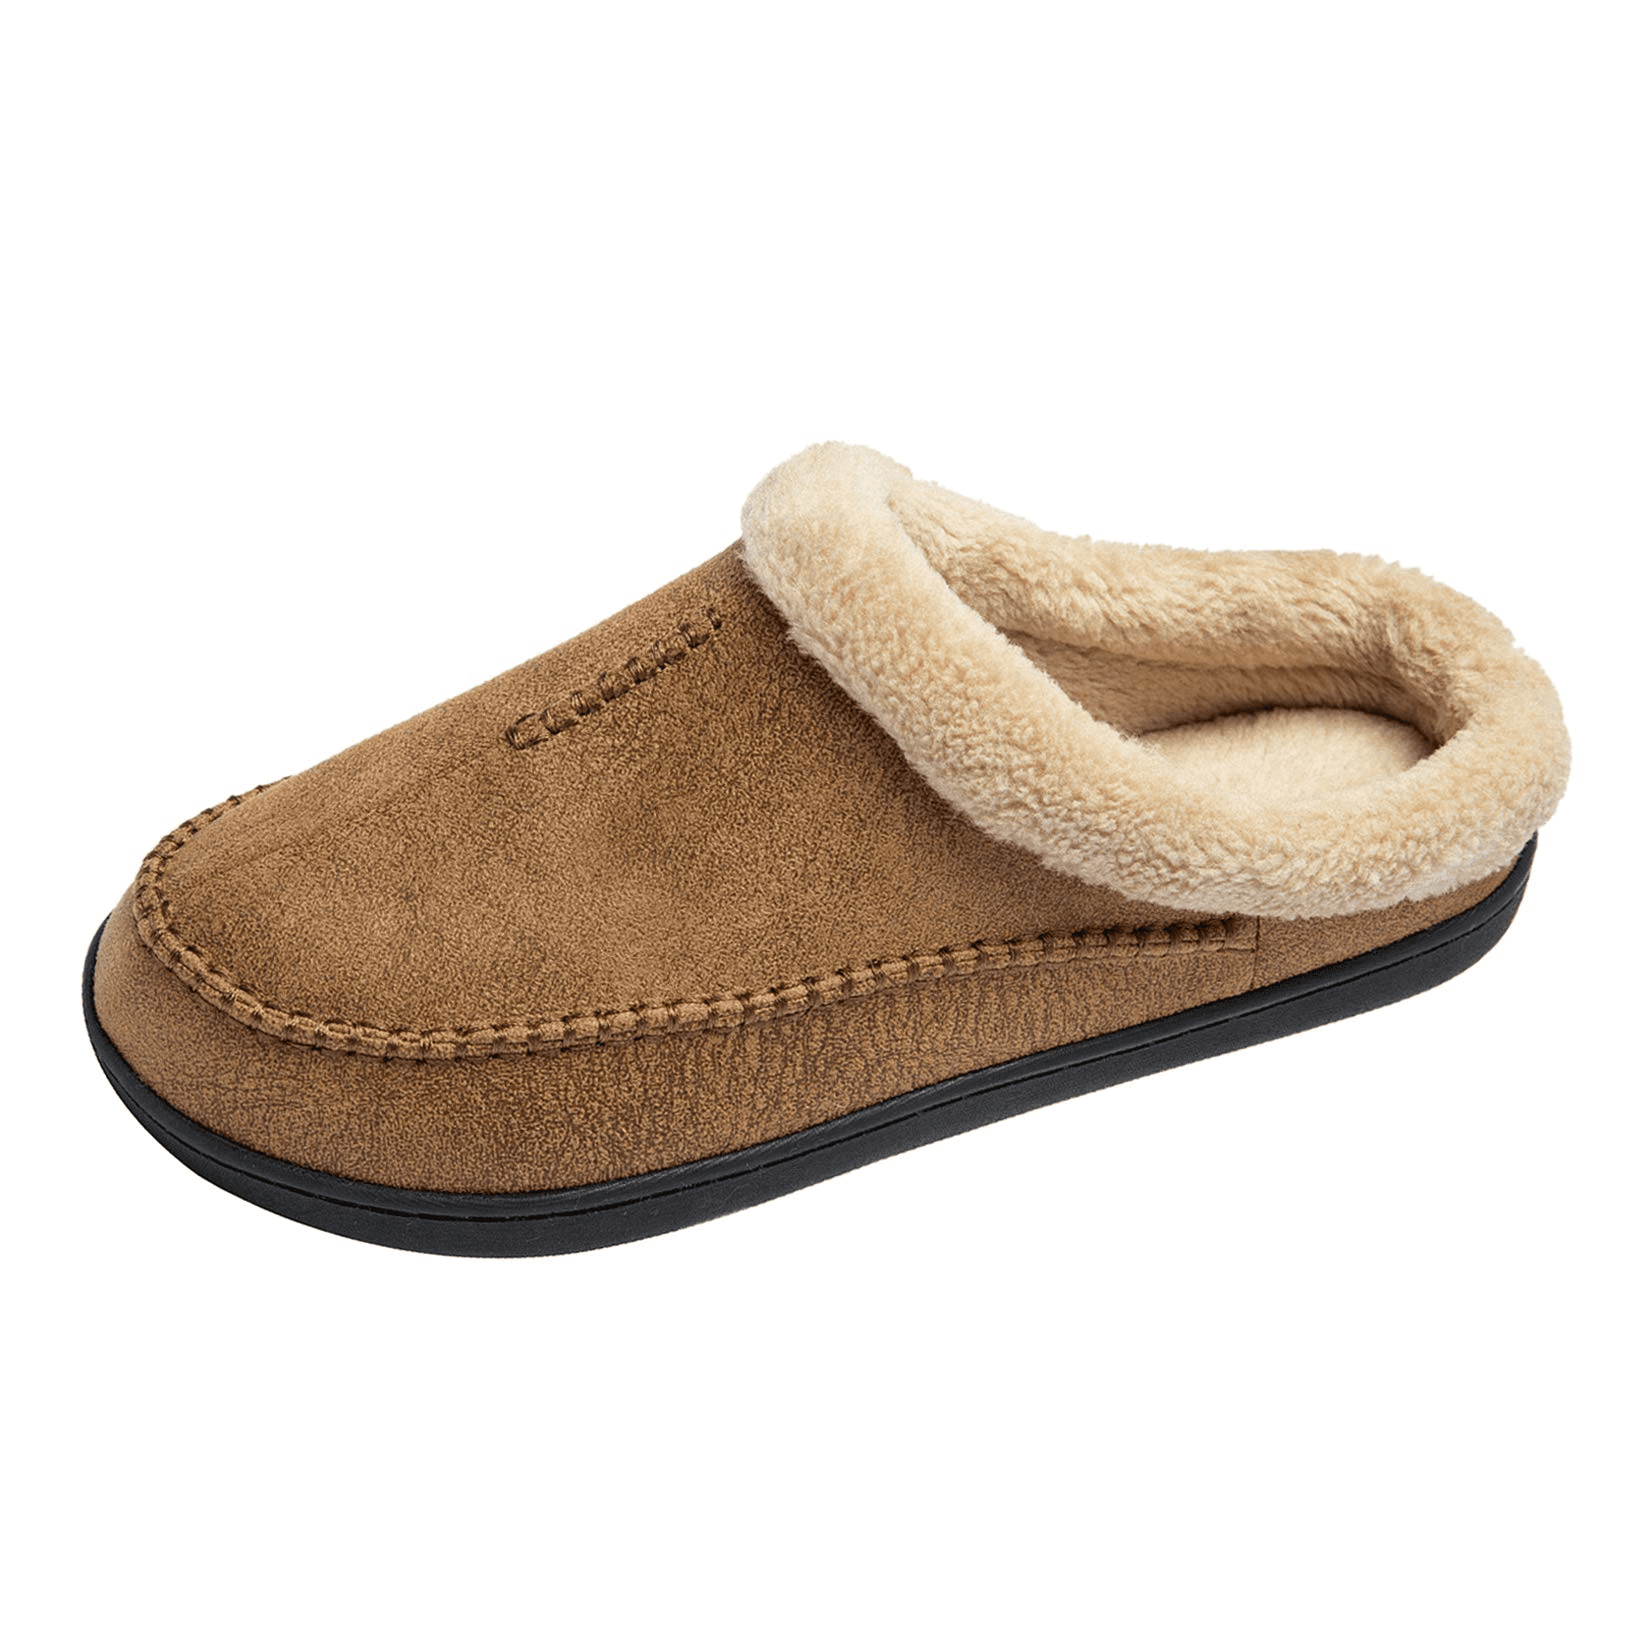 WOTTE Men's Moccasin Slippers Microsuede Fleece Fuzzy Lined Memory Foam House Shoes for Indoor Outdoor